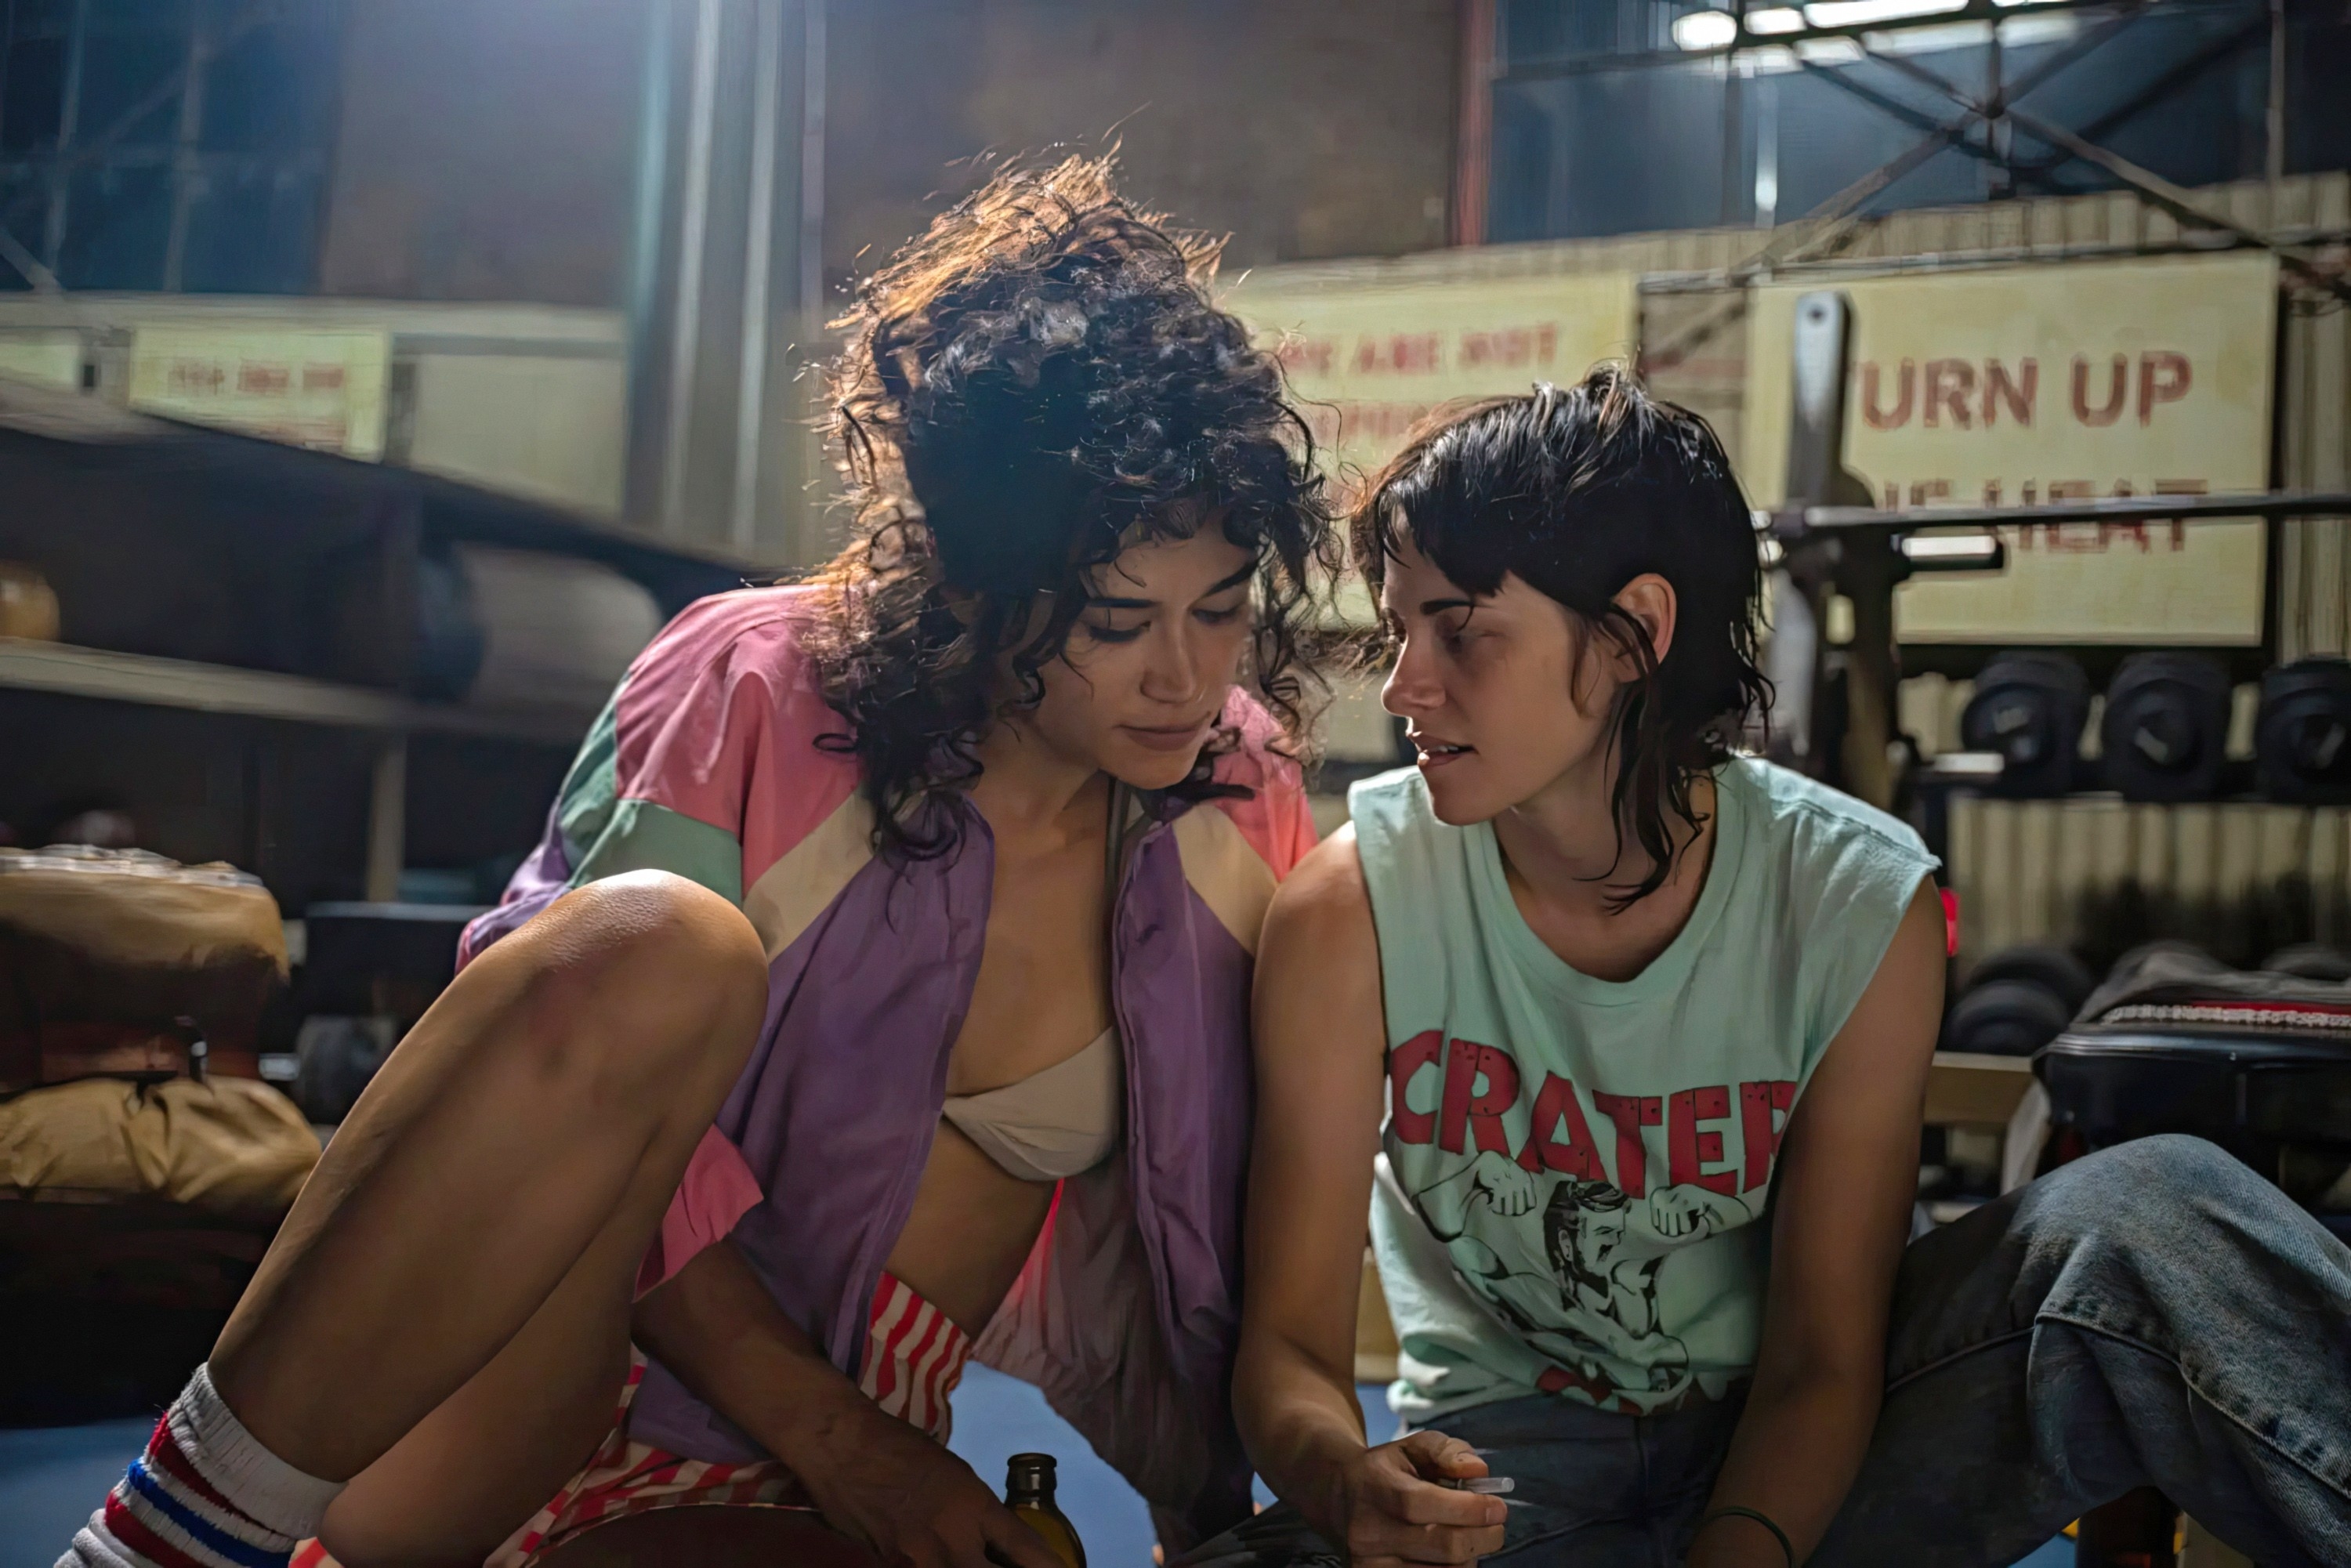 Lou and Katy&#x27;s character sitting close together on a gym floor in a scene from a production